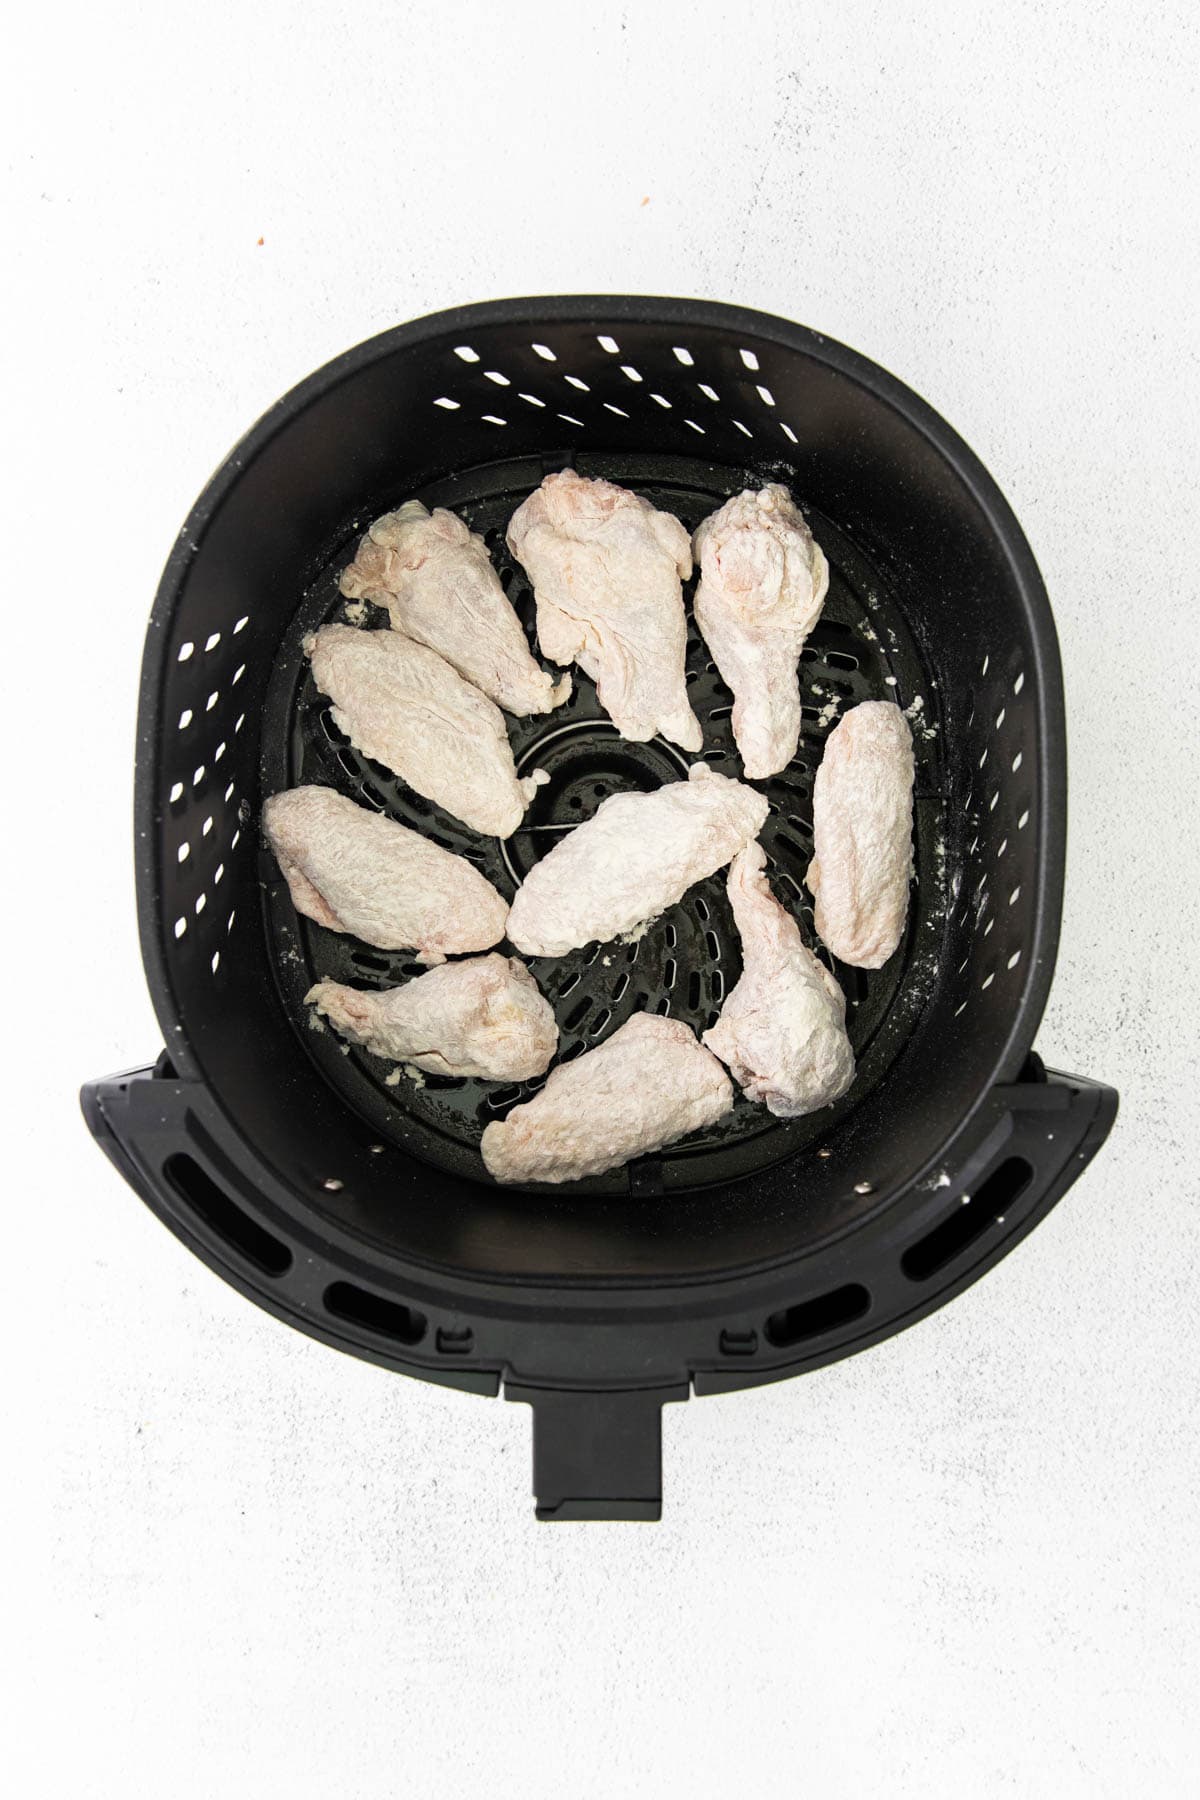 chicken wings in the basket of an air fryer tossed in flour